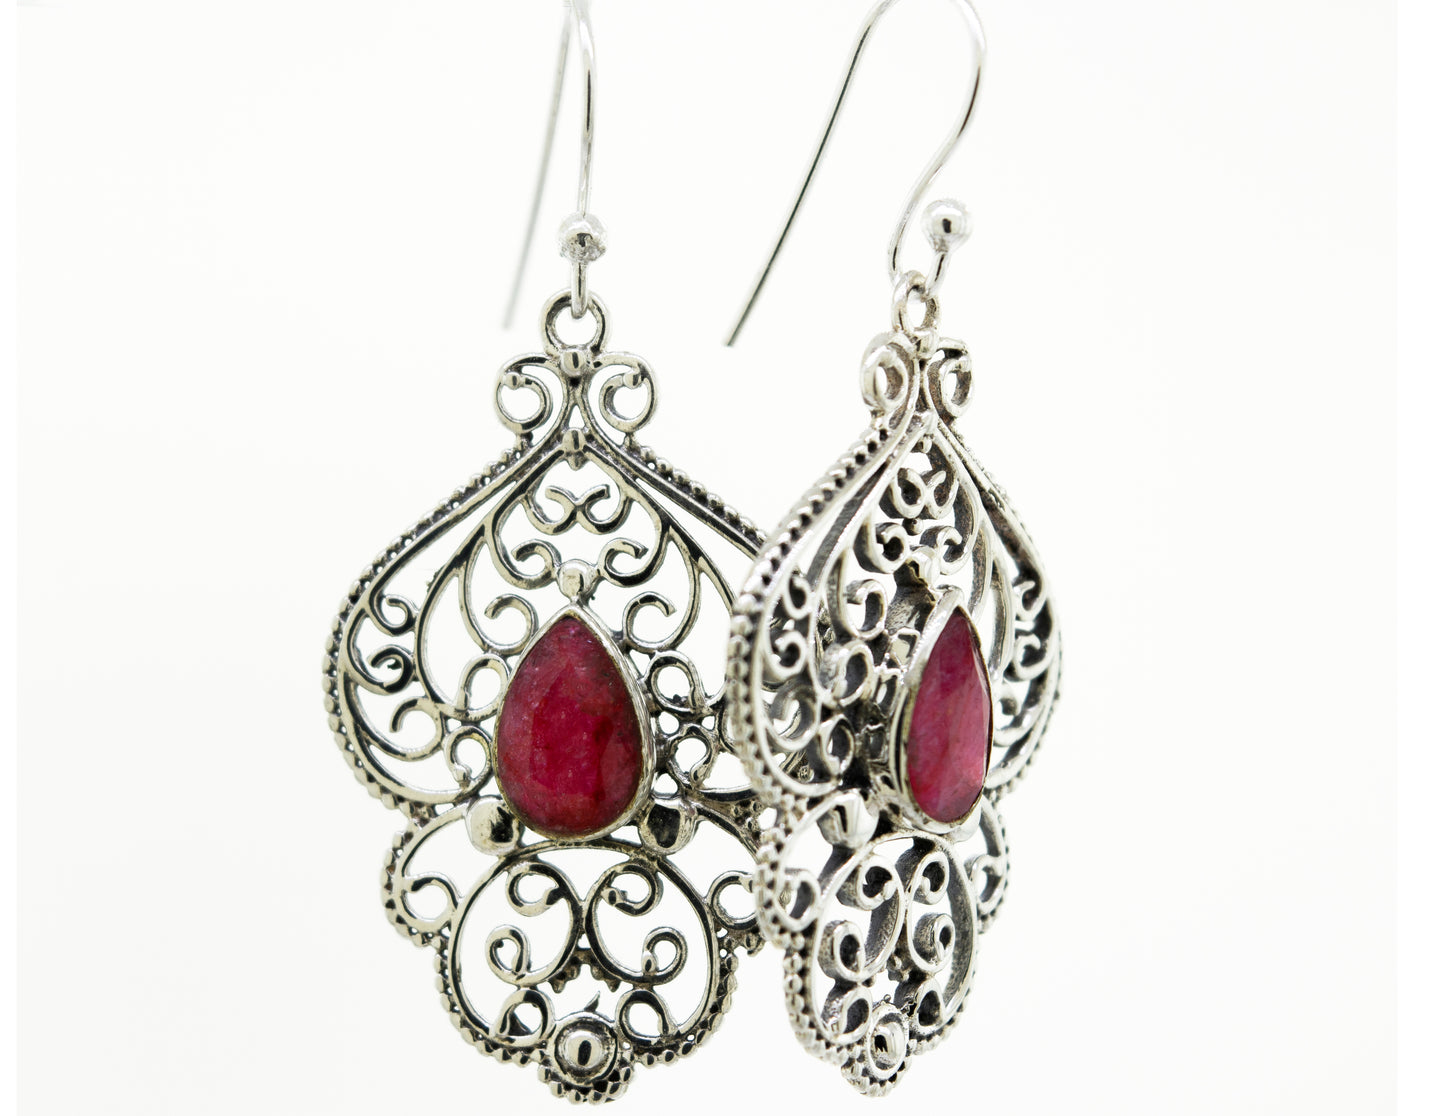 A pair of Teardrop Ruby Earrings With Freestyle Silver Design by Super Silver, featuring a vibrant teardrop-shaped ruby stone, set in a silver setting.